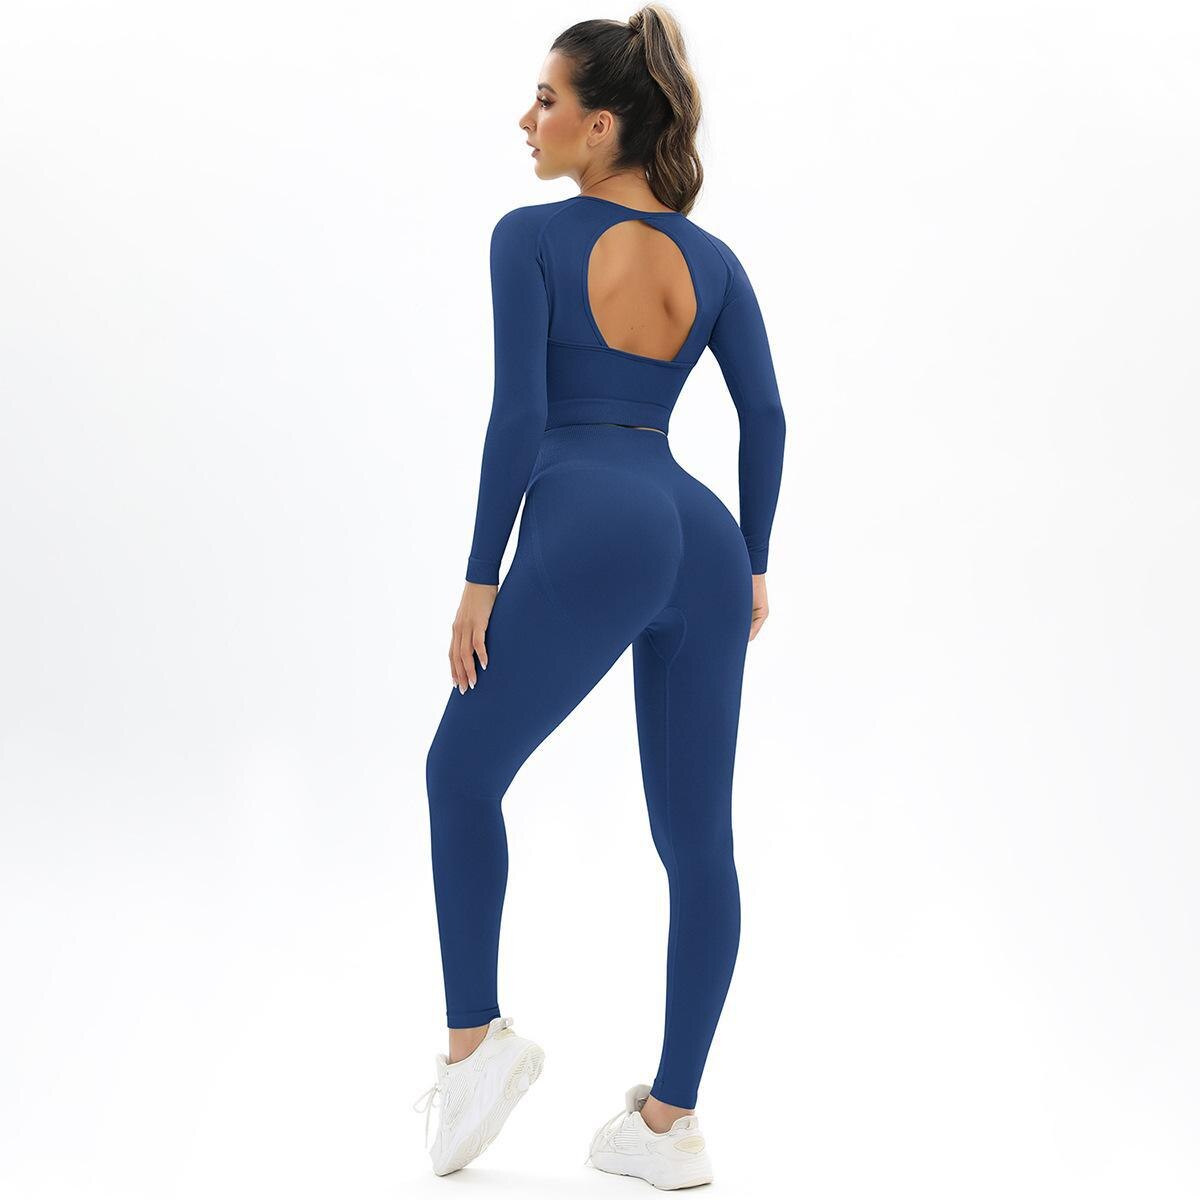 2-Pieces-Yoga-Sets-Sport-Femme-Activewear-Set-Girls-Seamless-Fitness-Suit-Workout-Clothes-Athletic-Wear-1